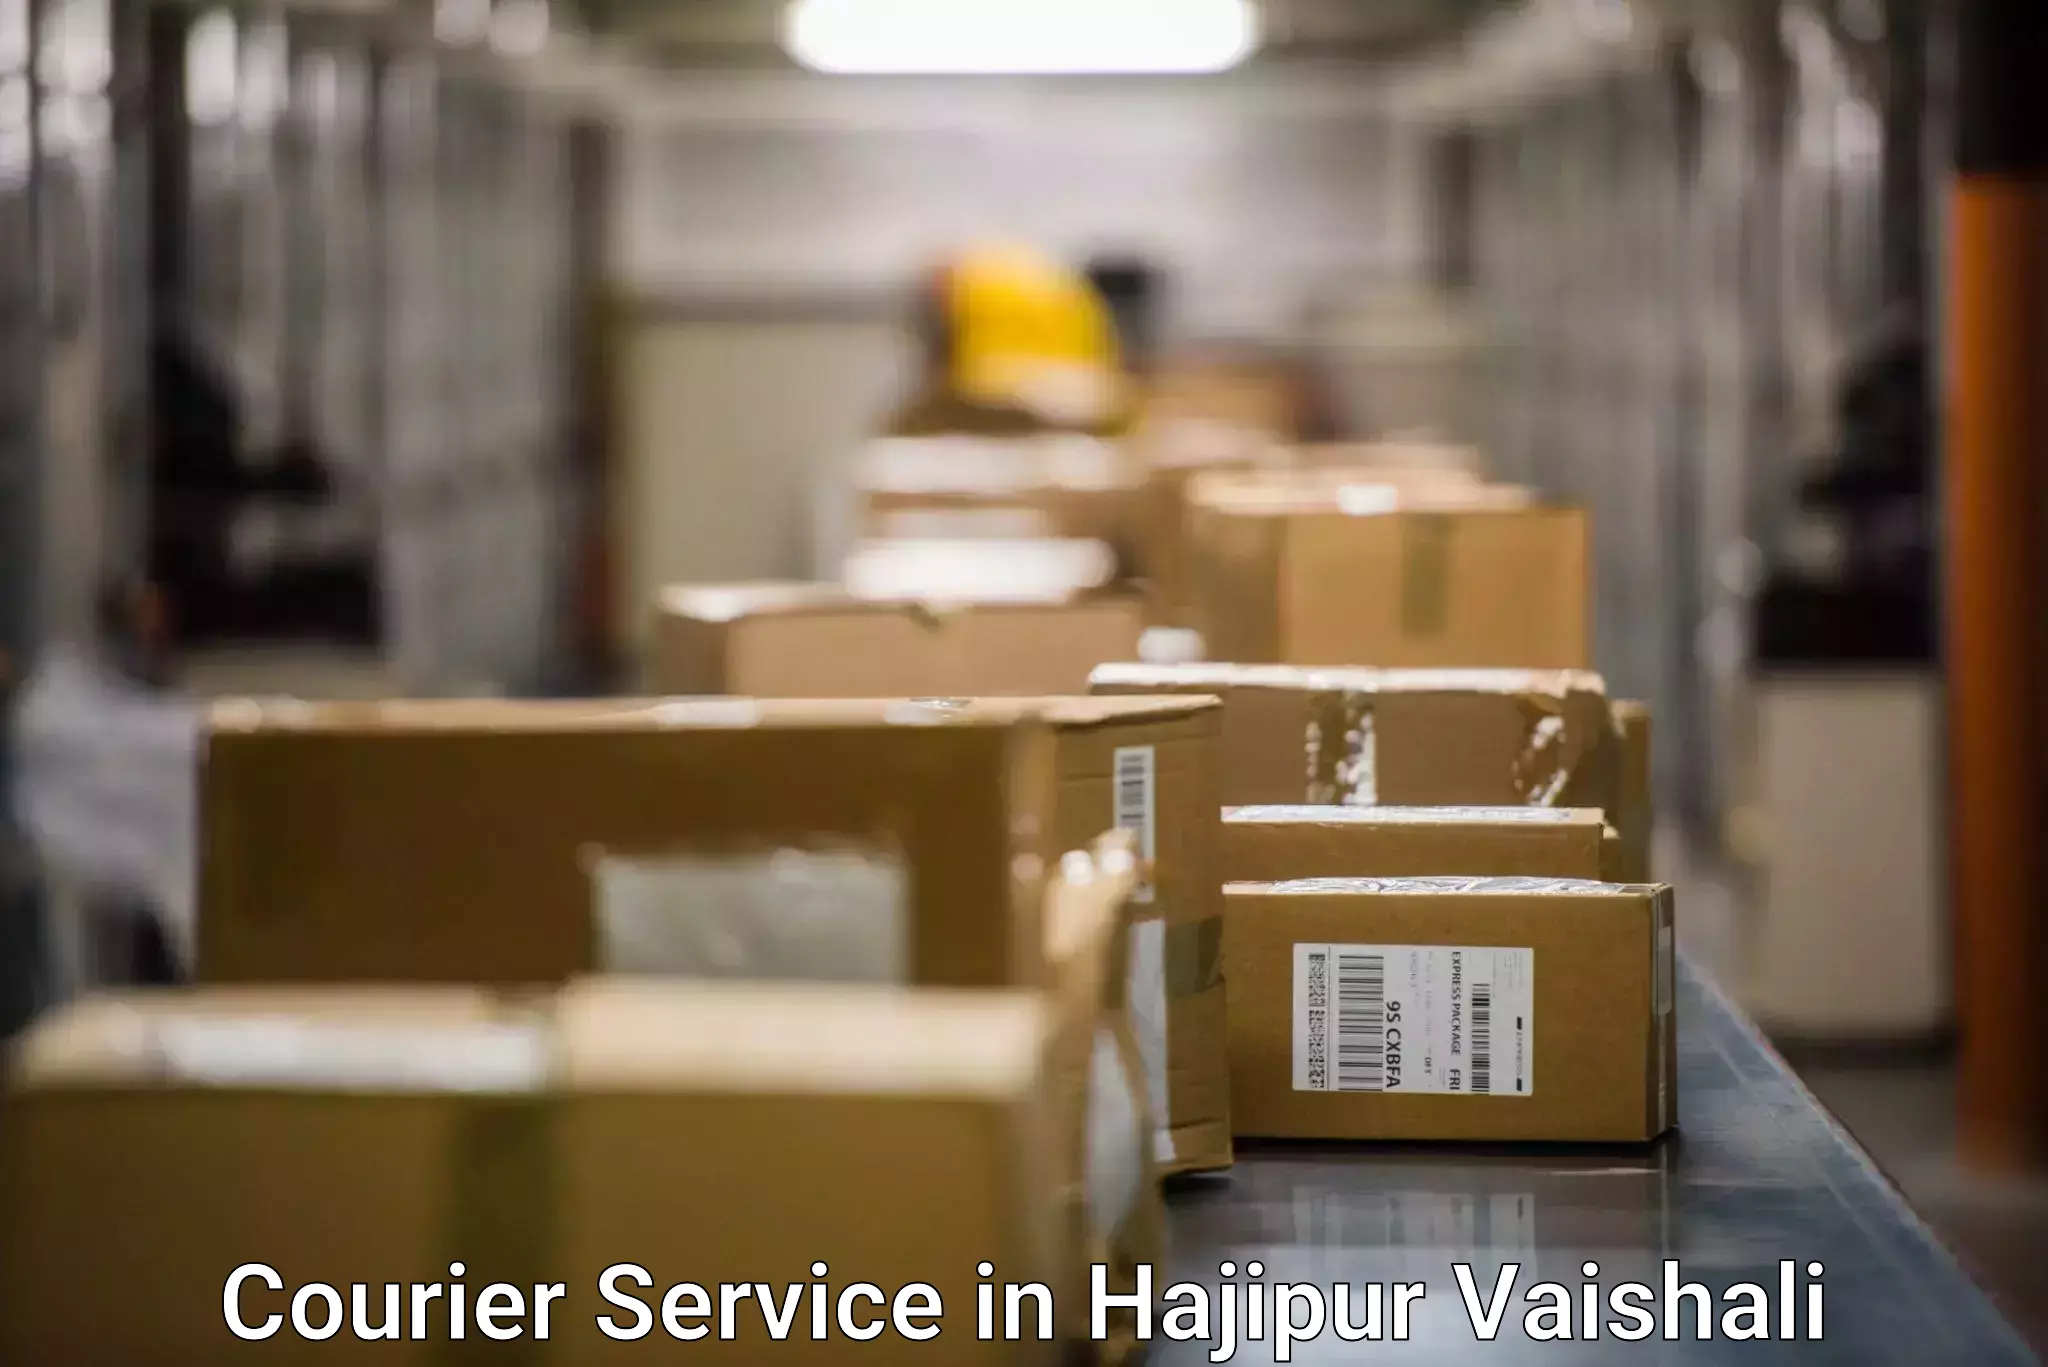 Sustainable courier practices in Hajipur Vaishali